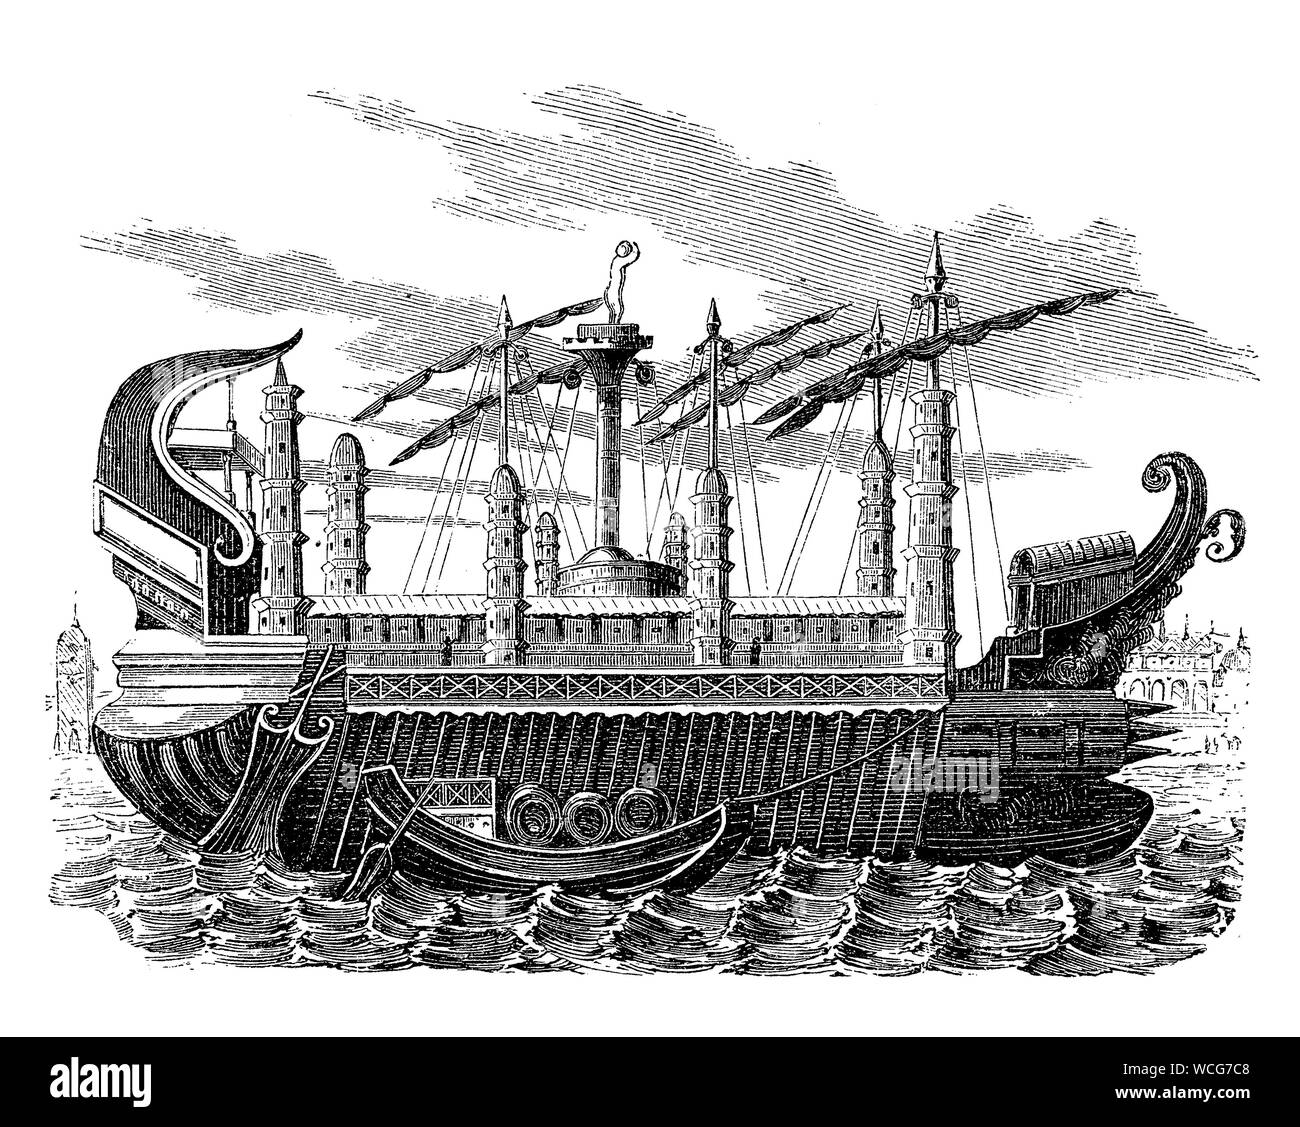 Syracusia  designed by Archimedes with antifouling technology to prevent the attachment of fouling organisms  was a ancient Greek ship the largest of antiquity able to transport goods, soldiers and catapults. Stock Photo